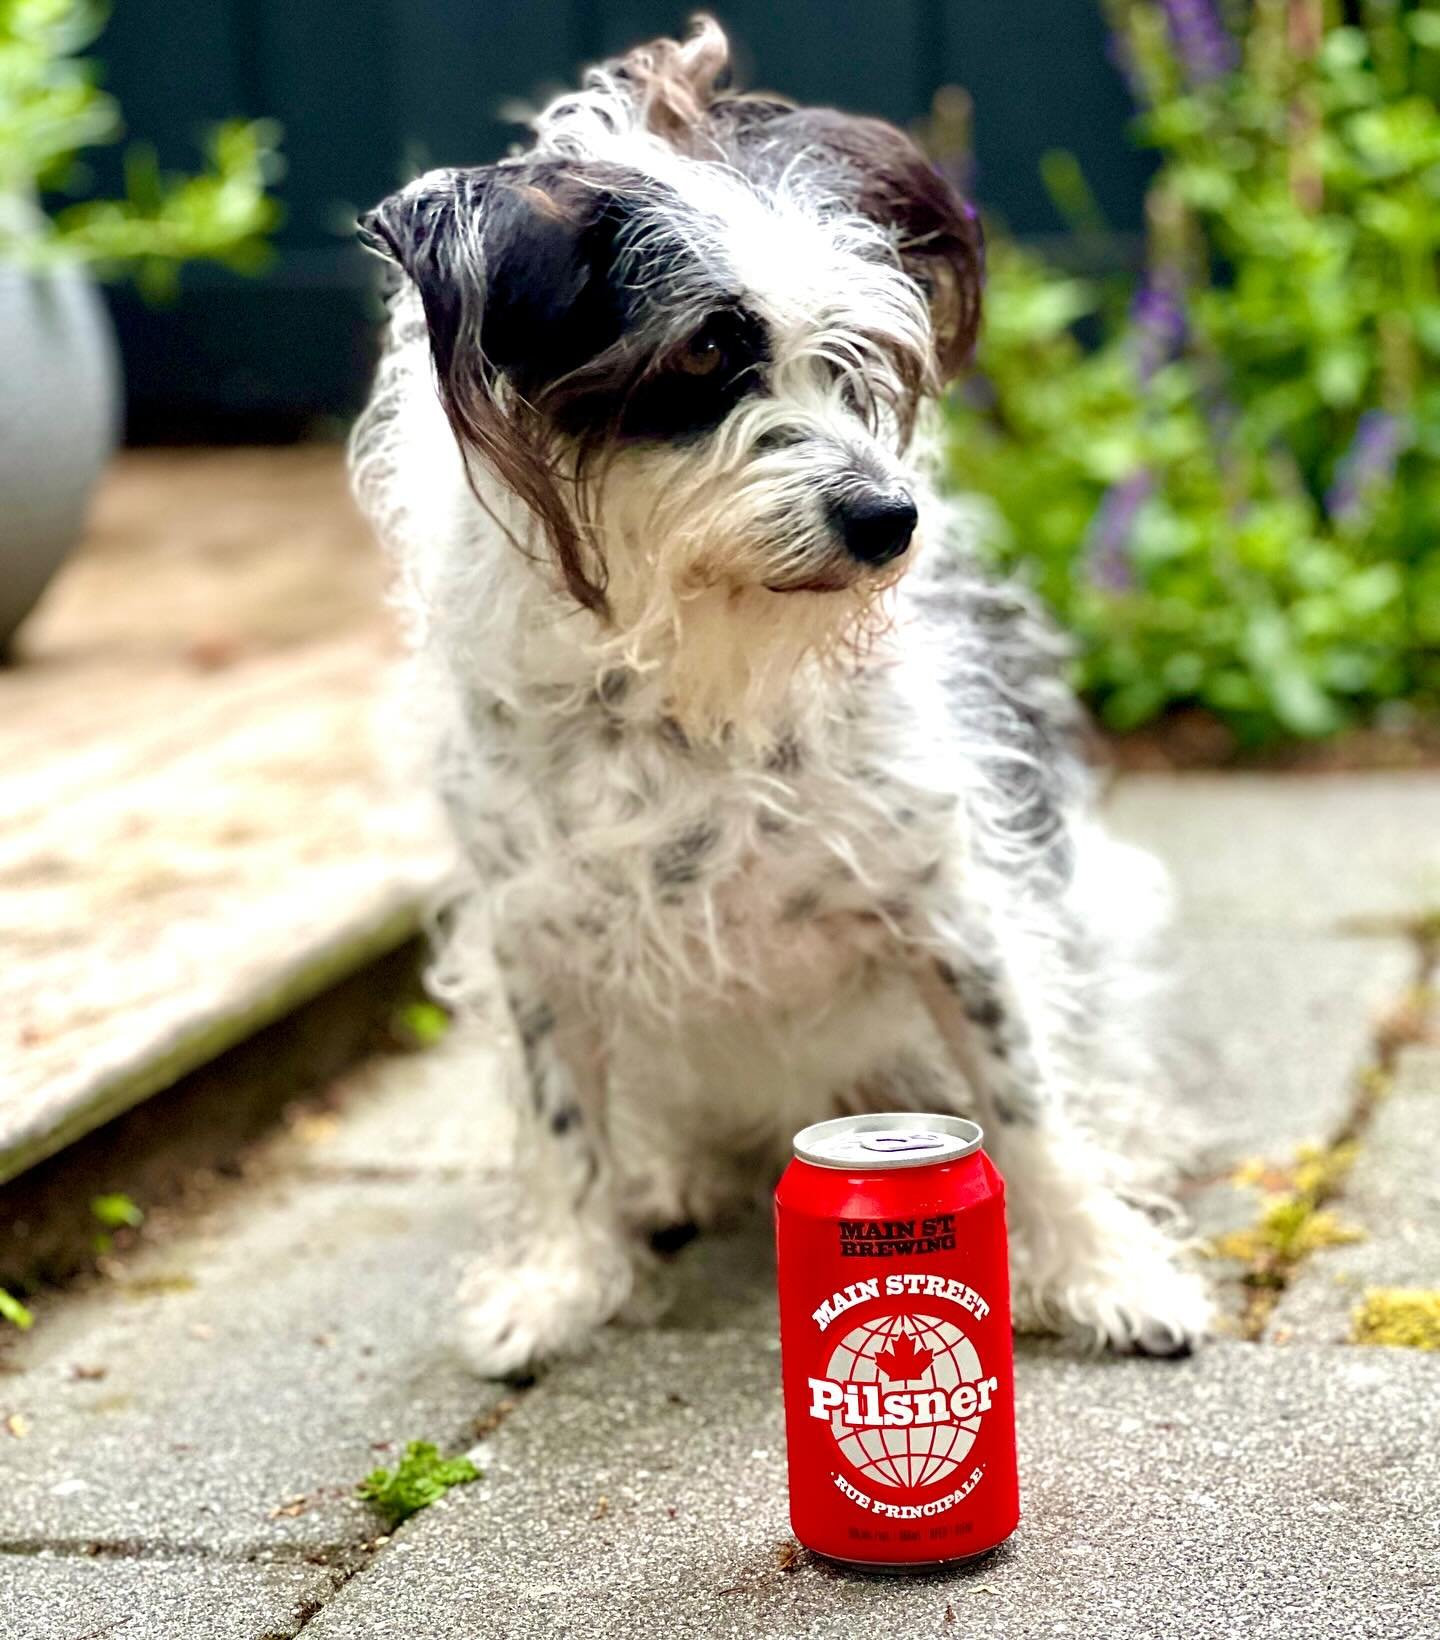 THIS DOG&rsquo;S GOT BITE

The OG. The first. The captain of our flagship.

Main Street Pilsner: find it at better @bcliquorstores and private outlets and bars and restaurants in your neighbourhood like:

@littlebirddimsum
@flourist
@lesfauxbourgeois